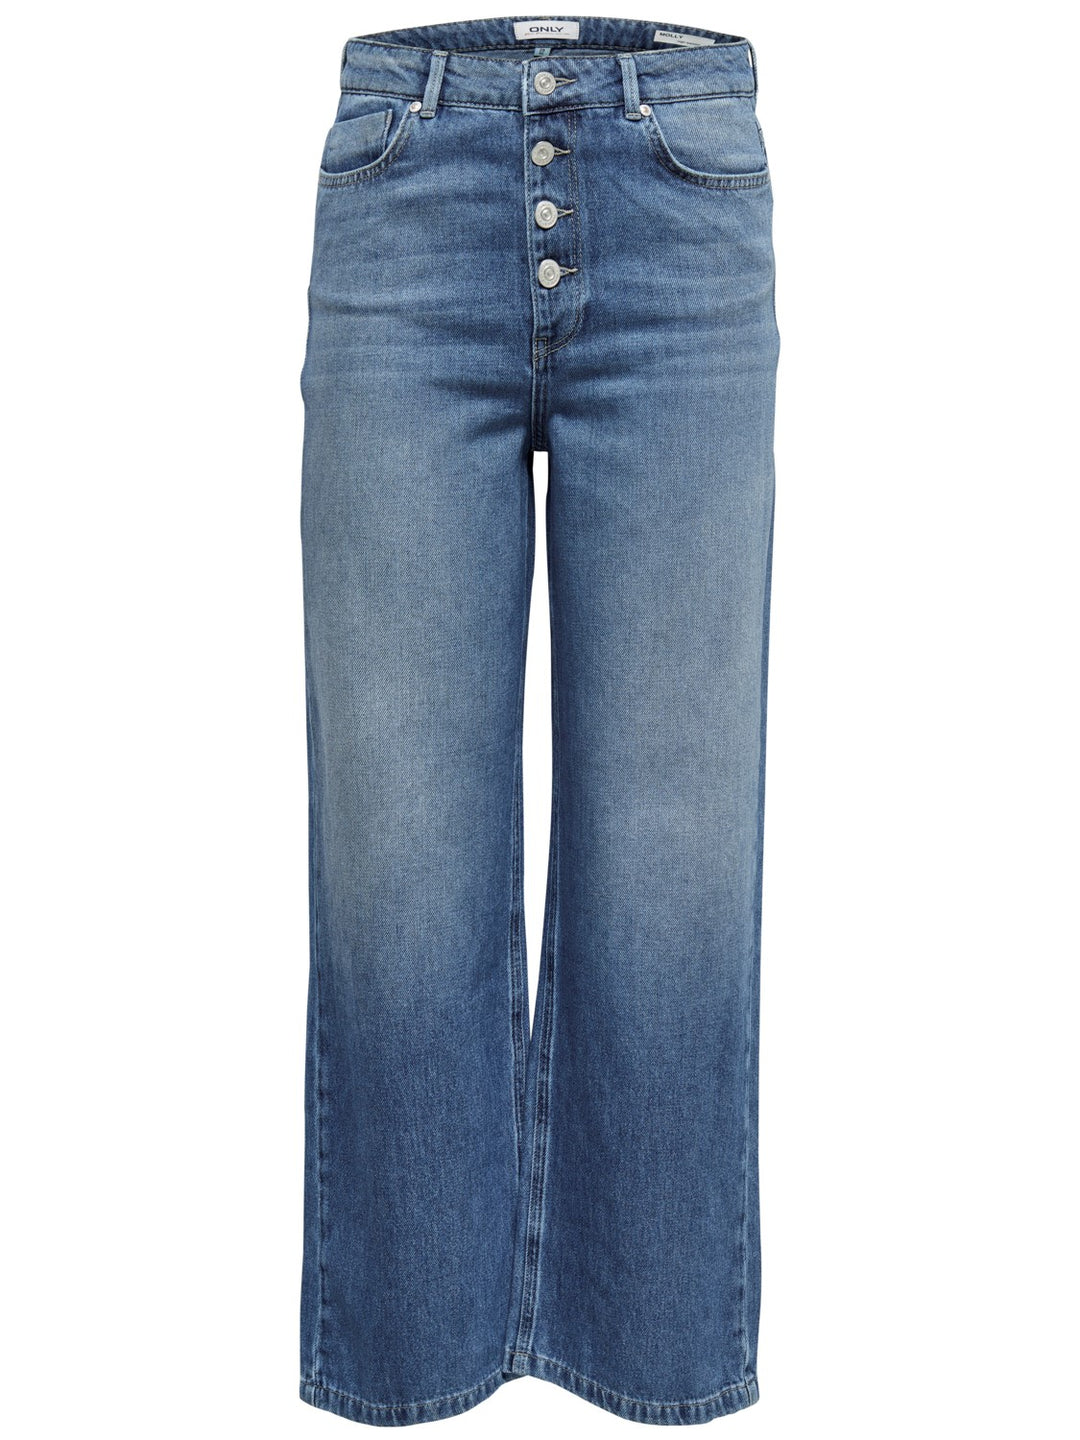 Molly HW wide crop button jeans